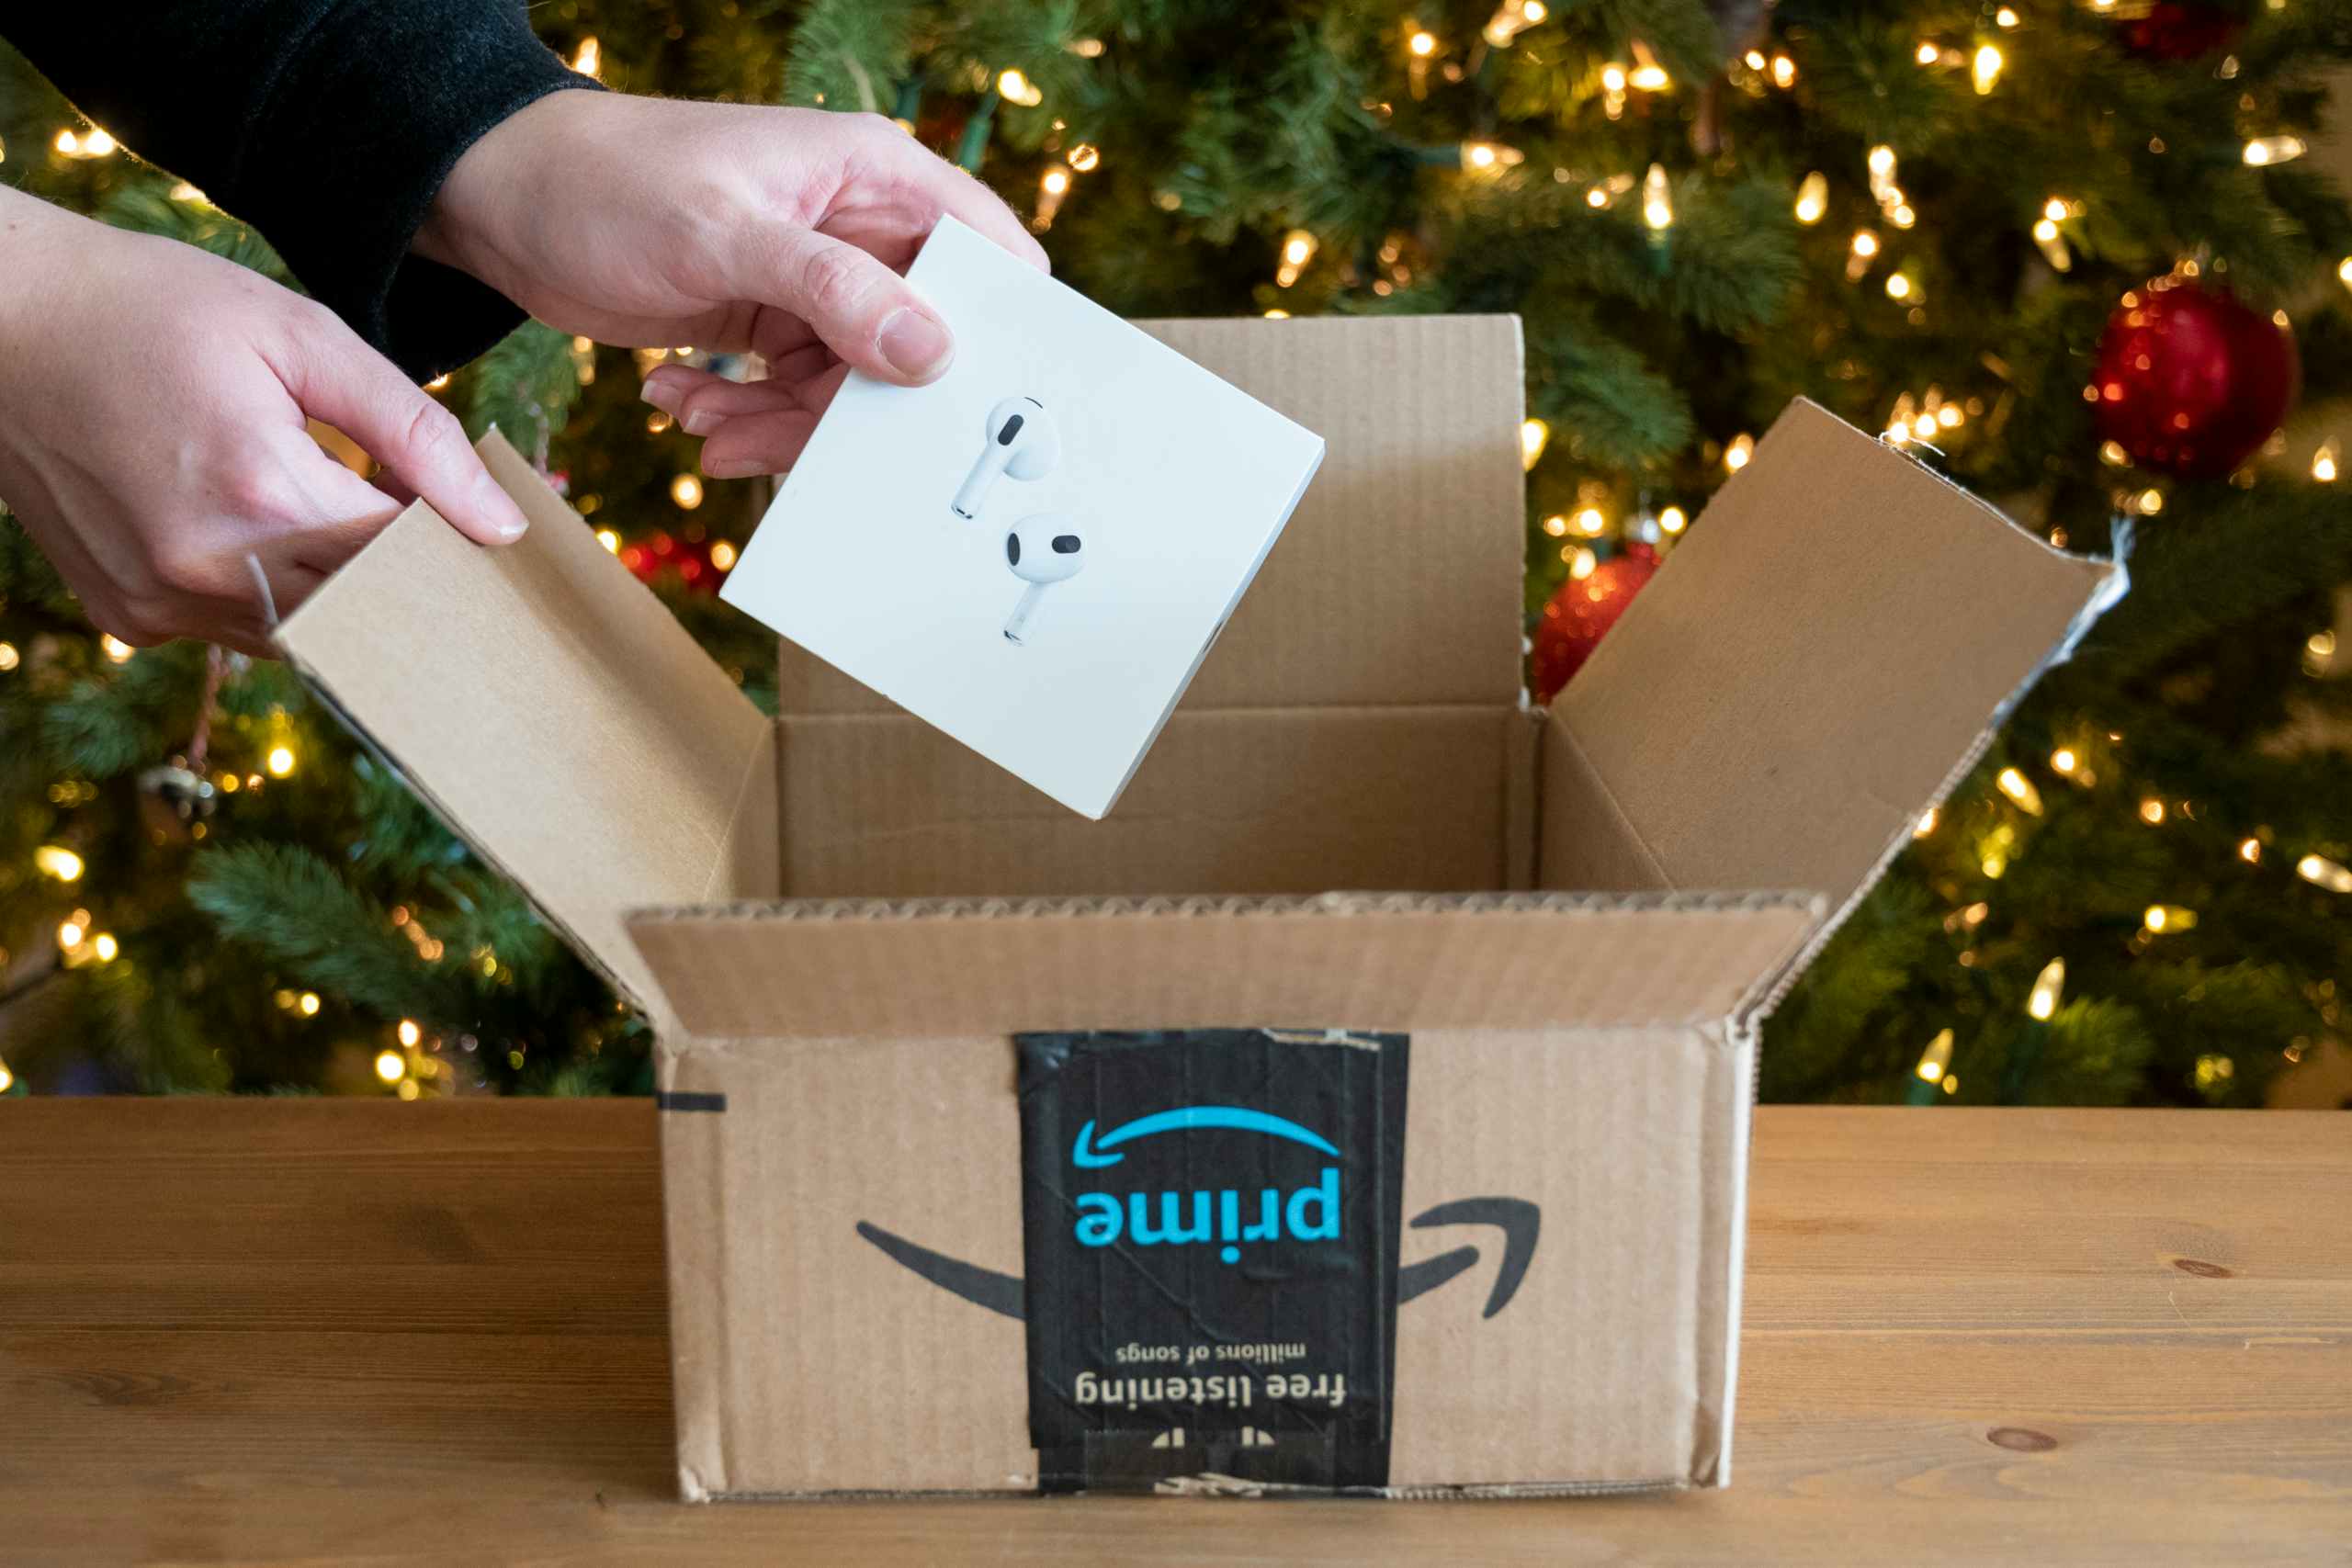 Apple Airpods pro with an amazon box in front of a Christmas tree.